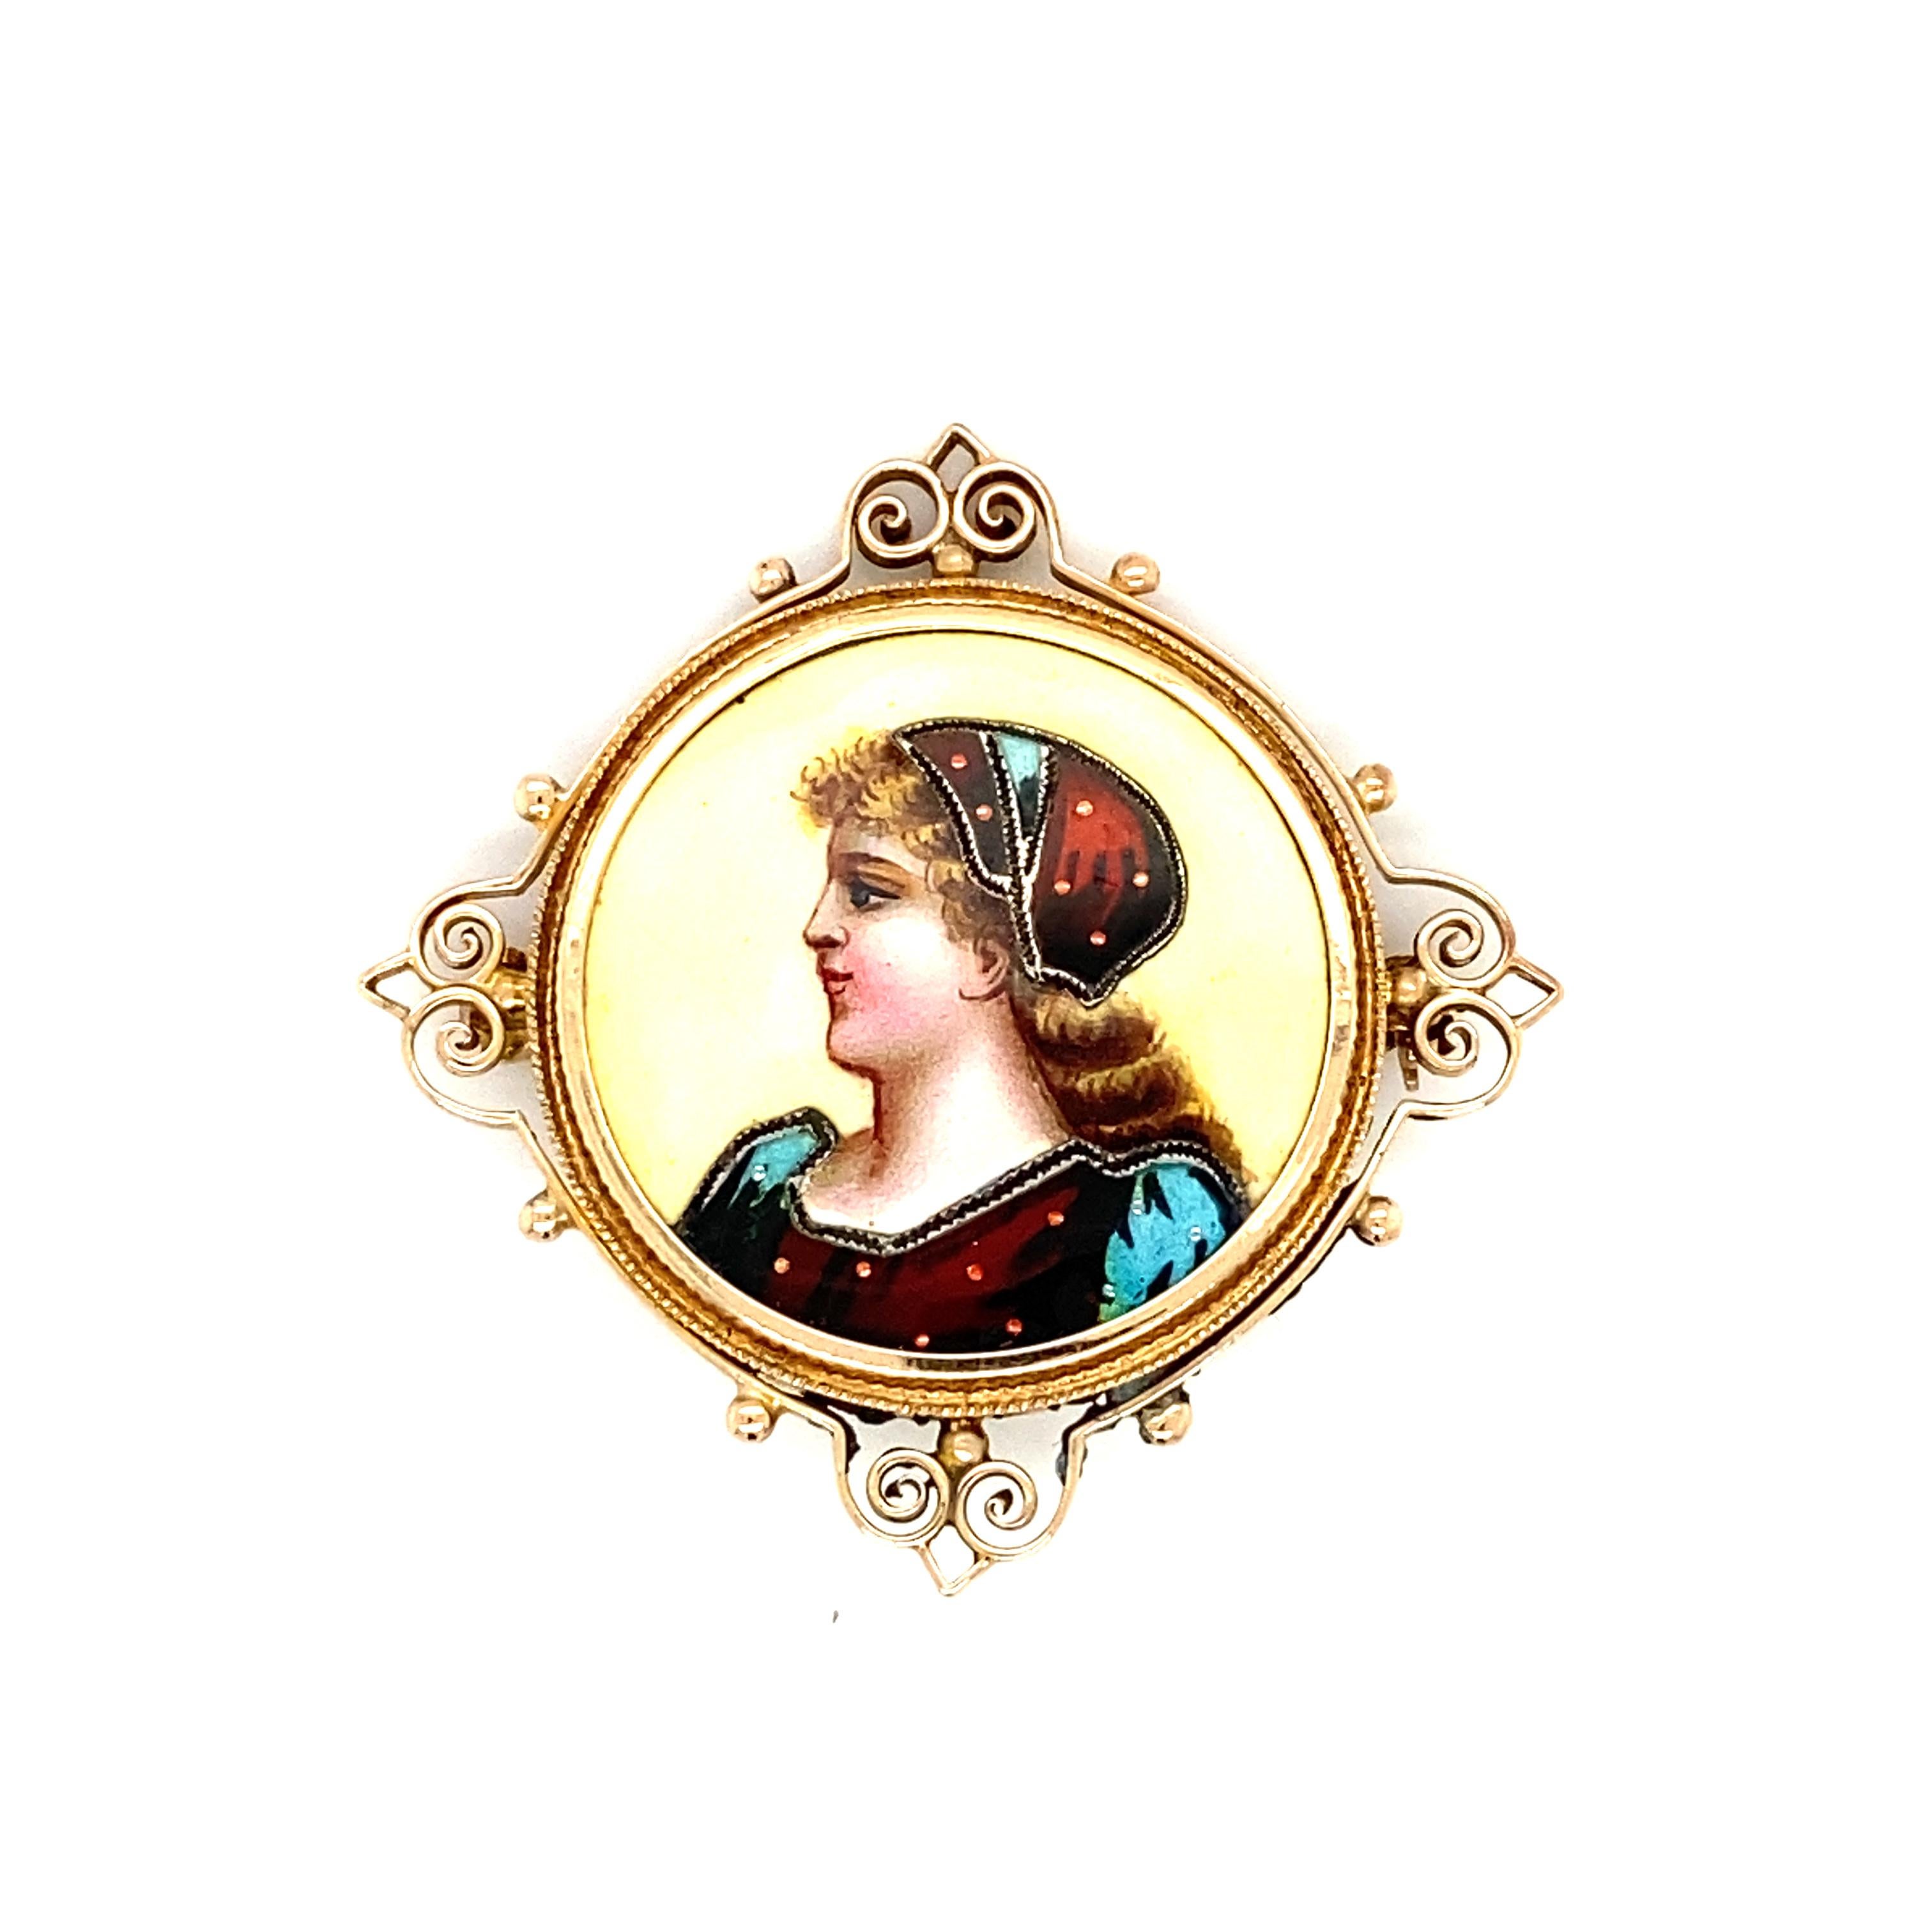 Item Details: This antique art deco brooch has a hand-painted portrait design on porcelain. It is framed in 10 Karat yellow gold with a scroll motif. The design and details are absolutely beautiful, with true art deco era characteristics 

Circa: